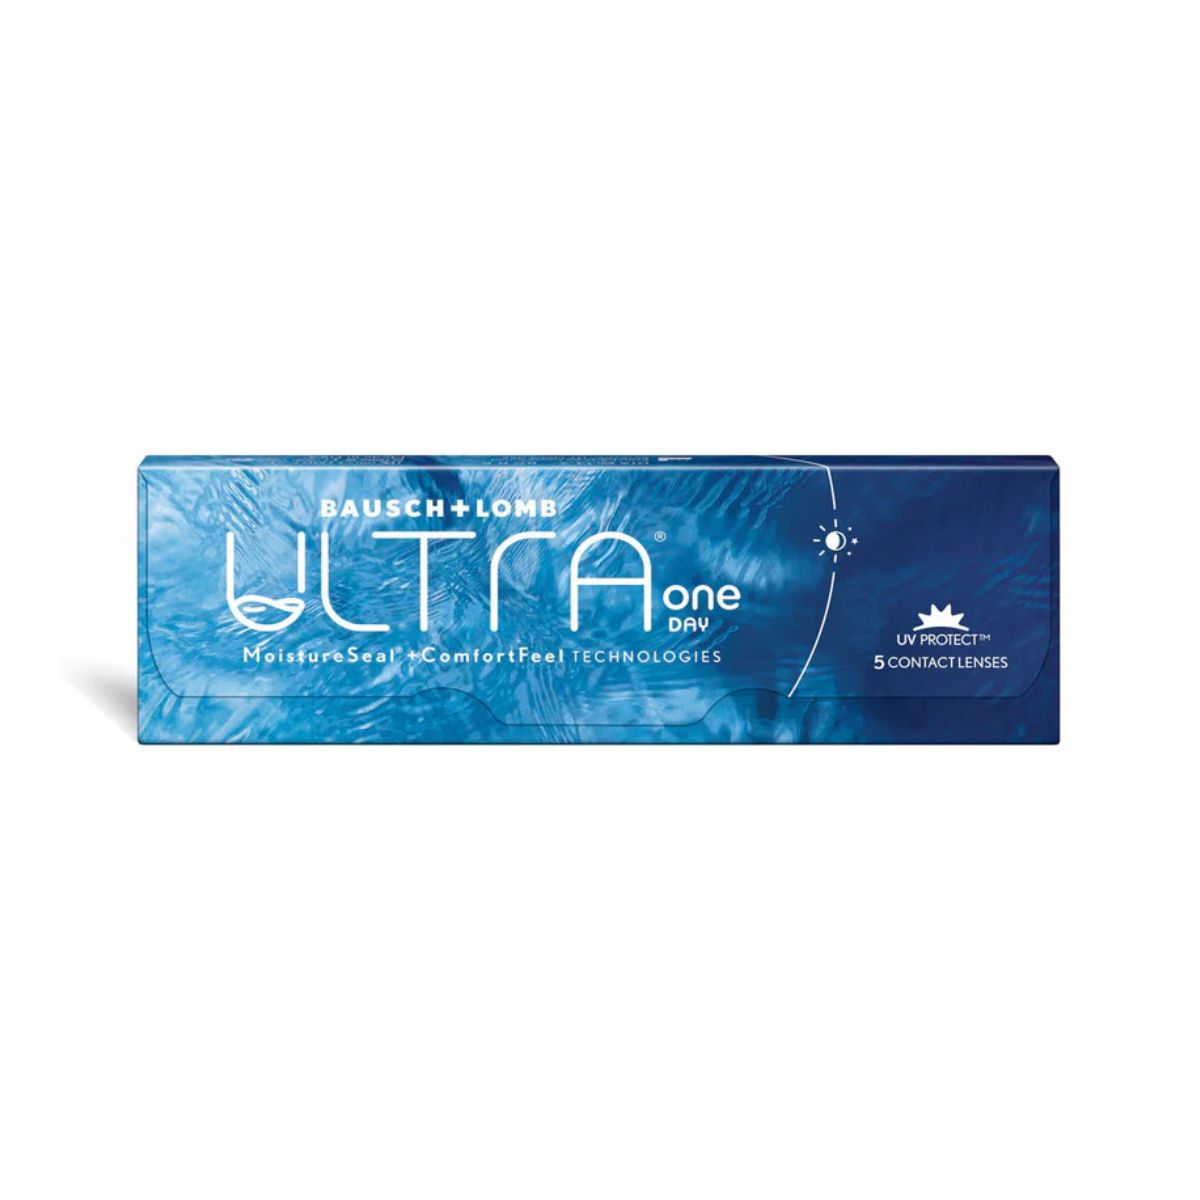 "Bausch & Lomb Ultra One Day Contact Lenses Daily Disposable optorium"